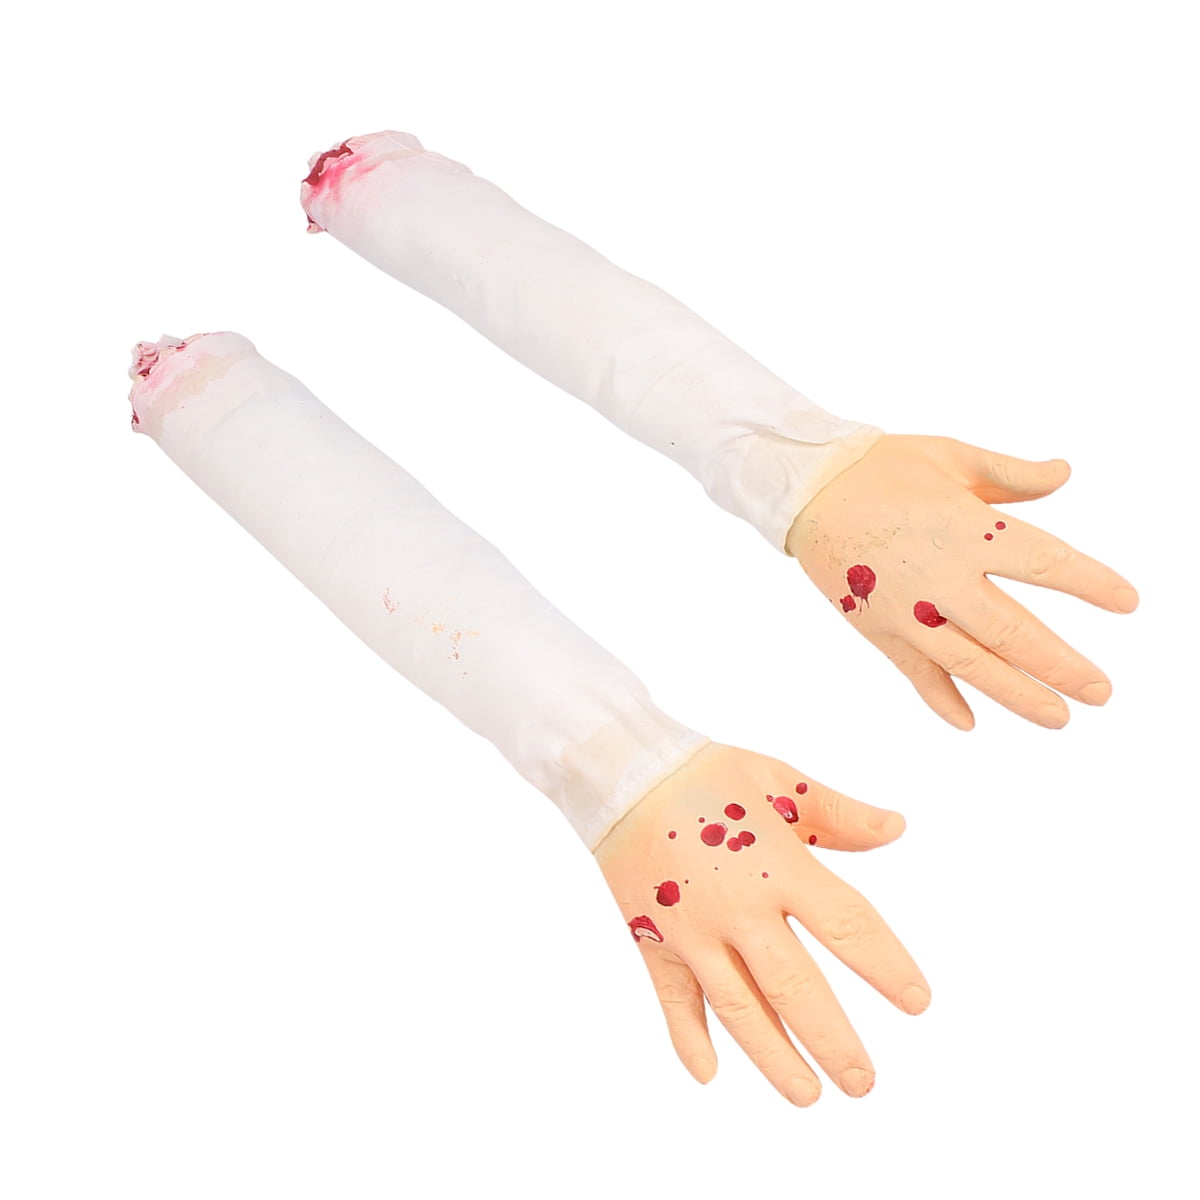 Simulation Hand 1pc Halloween Fake Hand Prop with Cloth Cover Horror Prank Prop Realistic Hand, Size: 20x12x3.5CM, Other